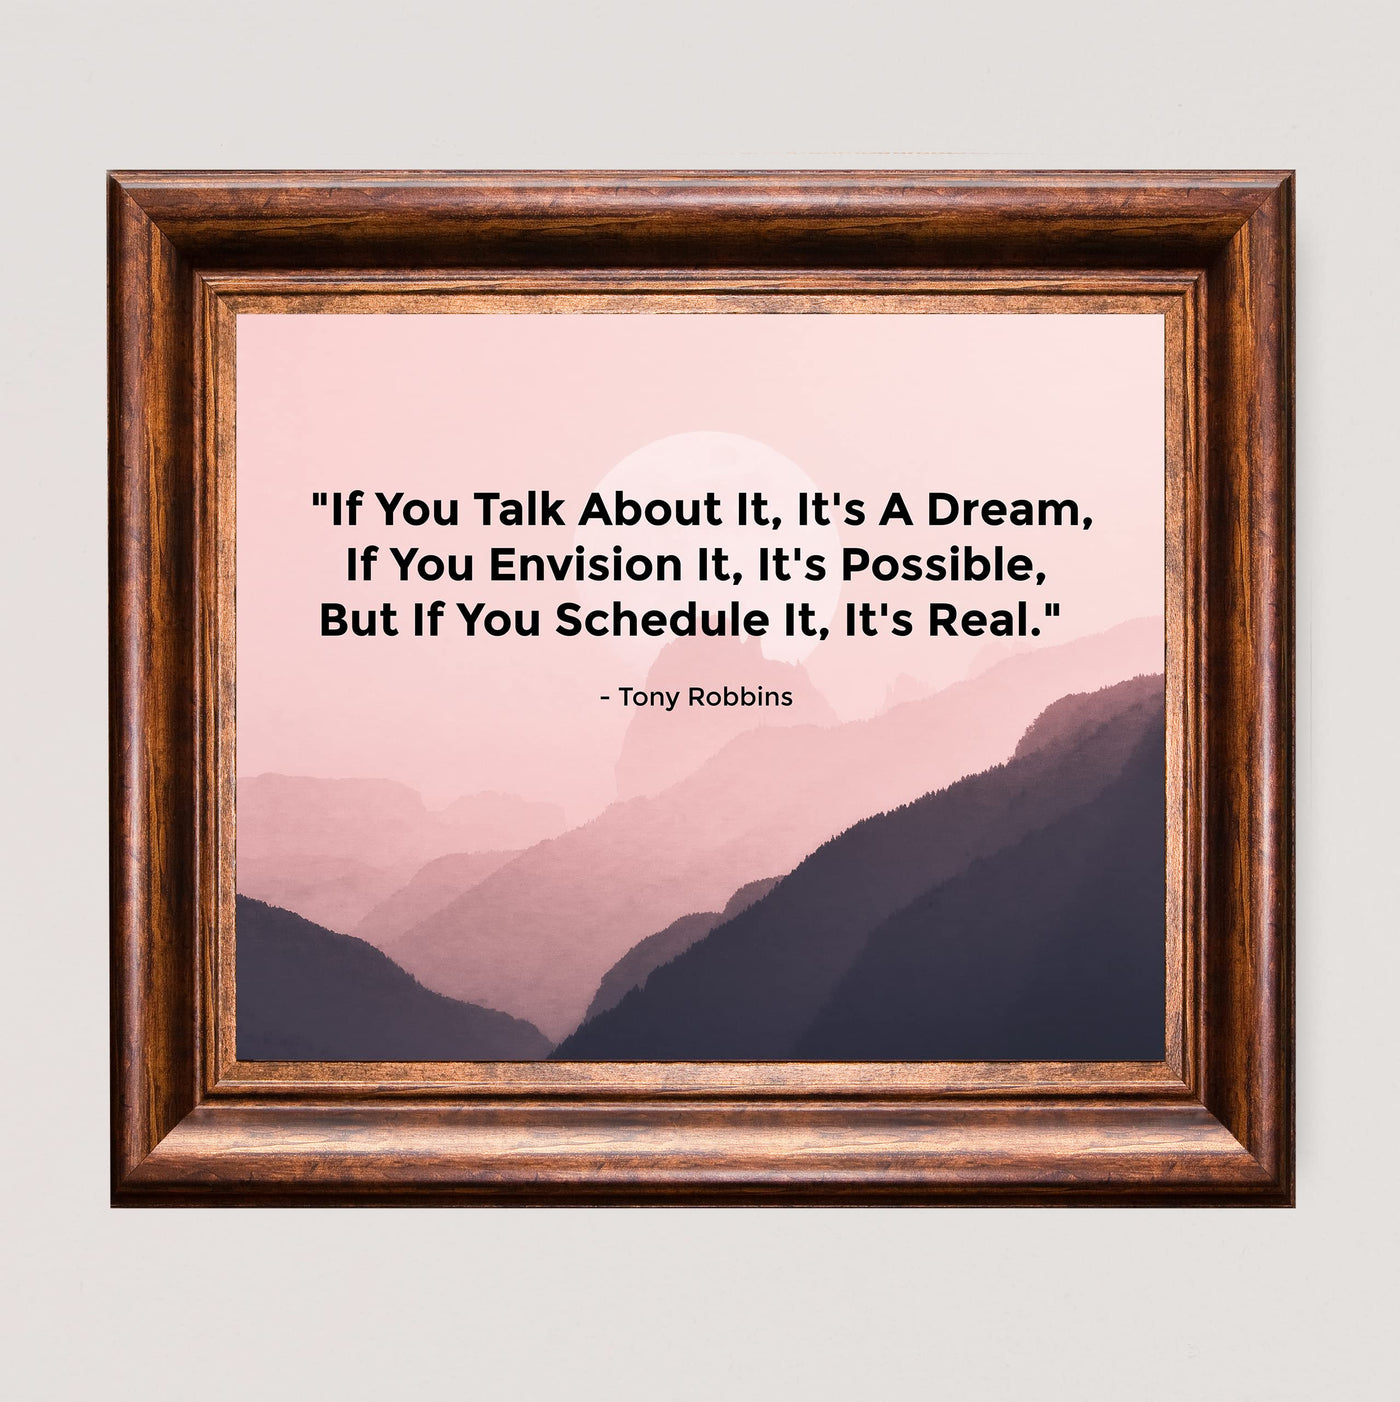 Tony Robbins-"If You Schedule It, It's Real"-Motivational Quotes Wall Art -10 x 8" Inspirational Mountain Print-Ready to Frame. Home-Office-School-Work Decor! Great Christian Gift of Motivation!